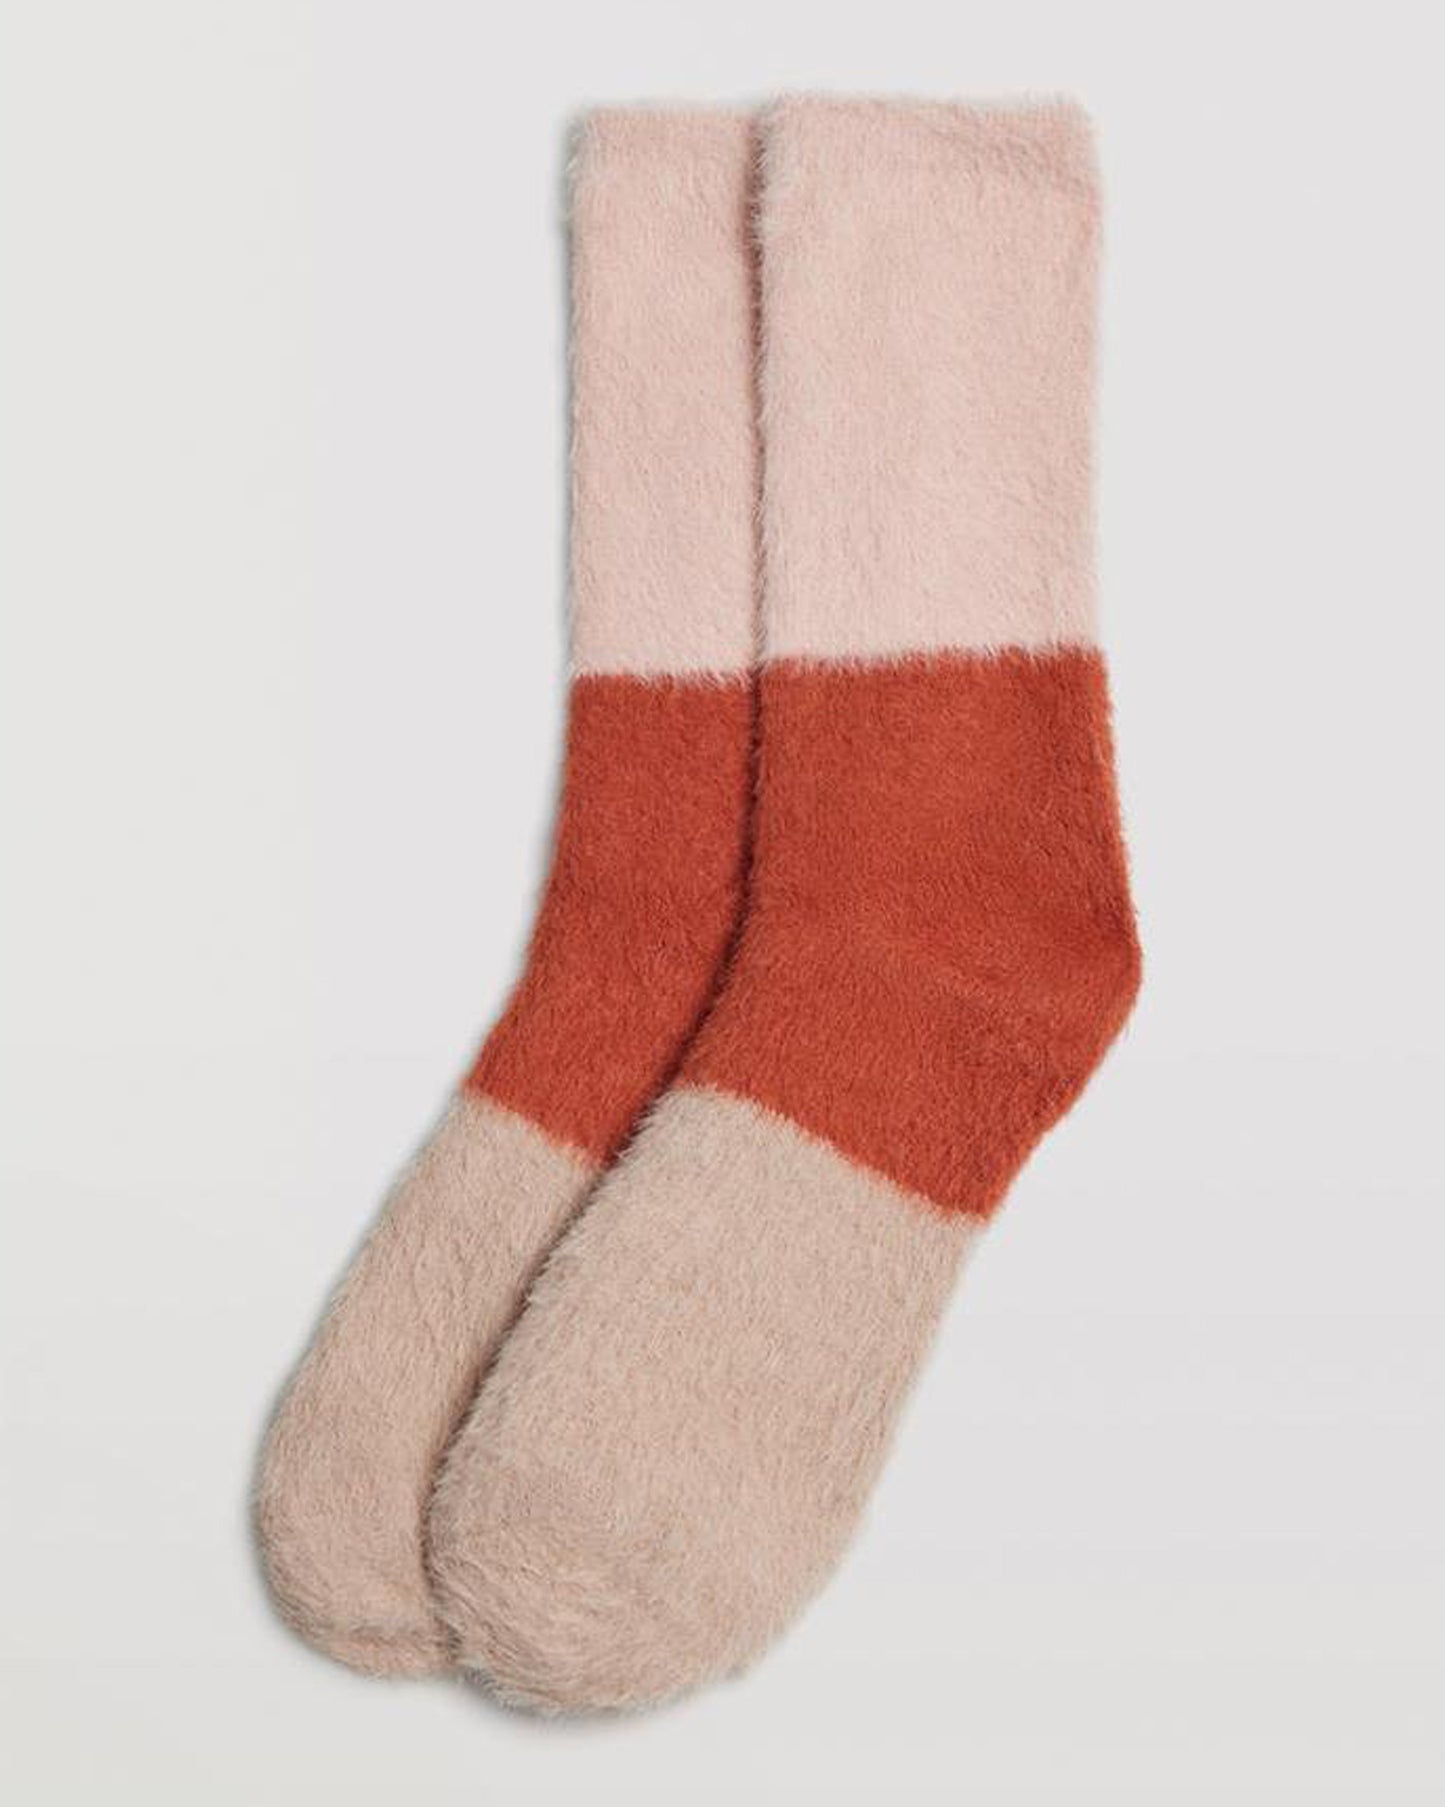 Ysabel Mora 12898 Fluffy Tricolour Socks - Soft and fluffy socks with 3 panels of colour, anti-pressure cuff in pale pink, orange and beige.